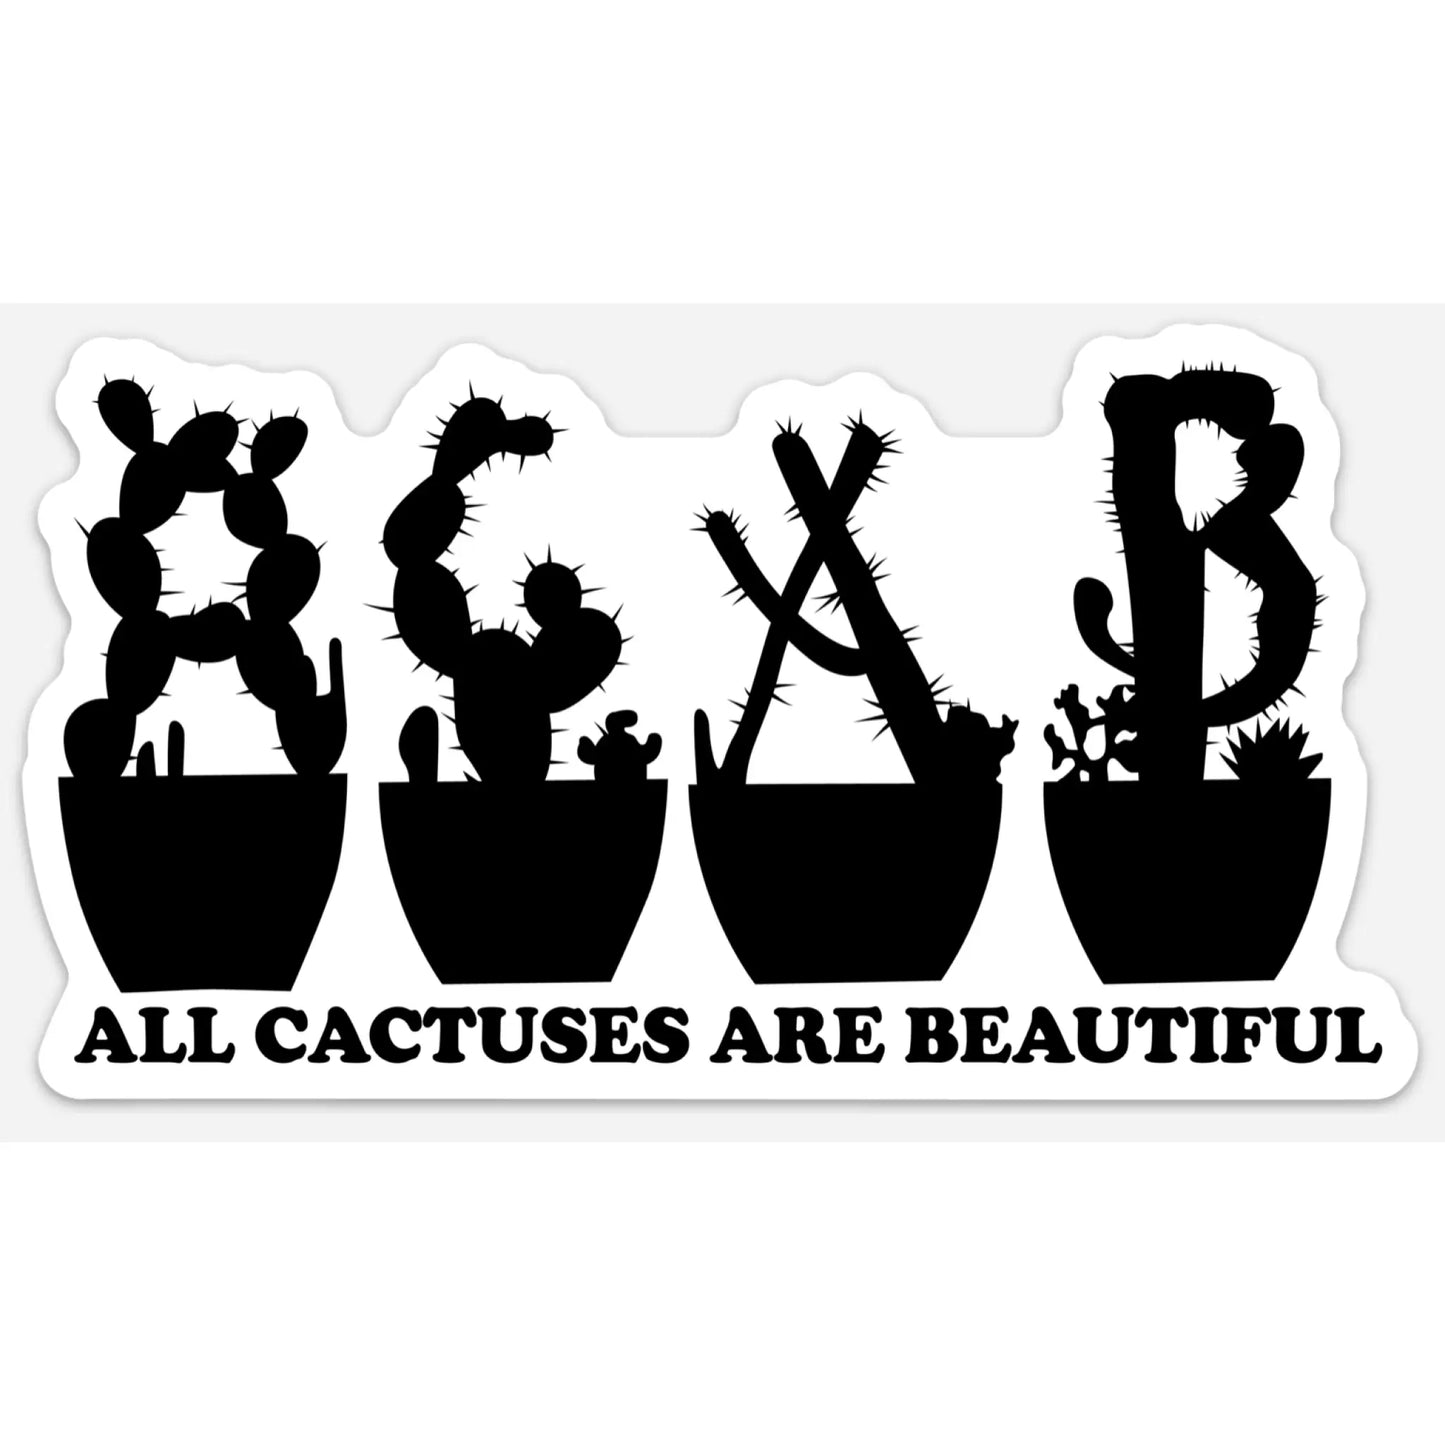 All Cactuses Are Beautiful Bumper Sticker - acab